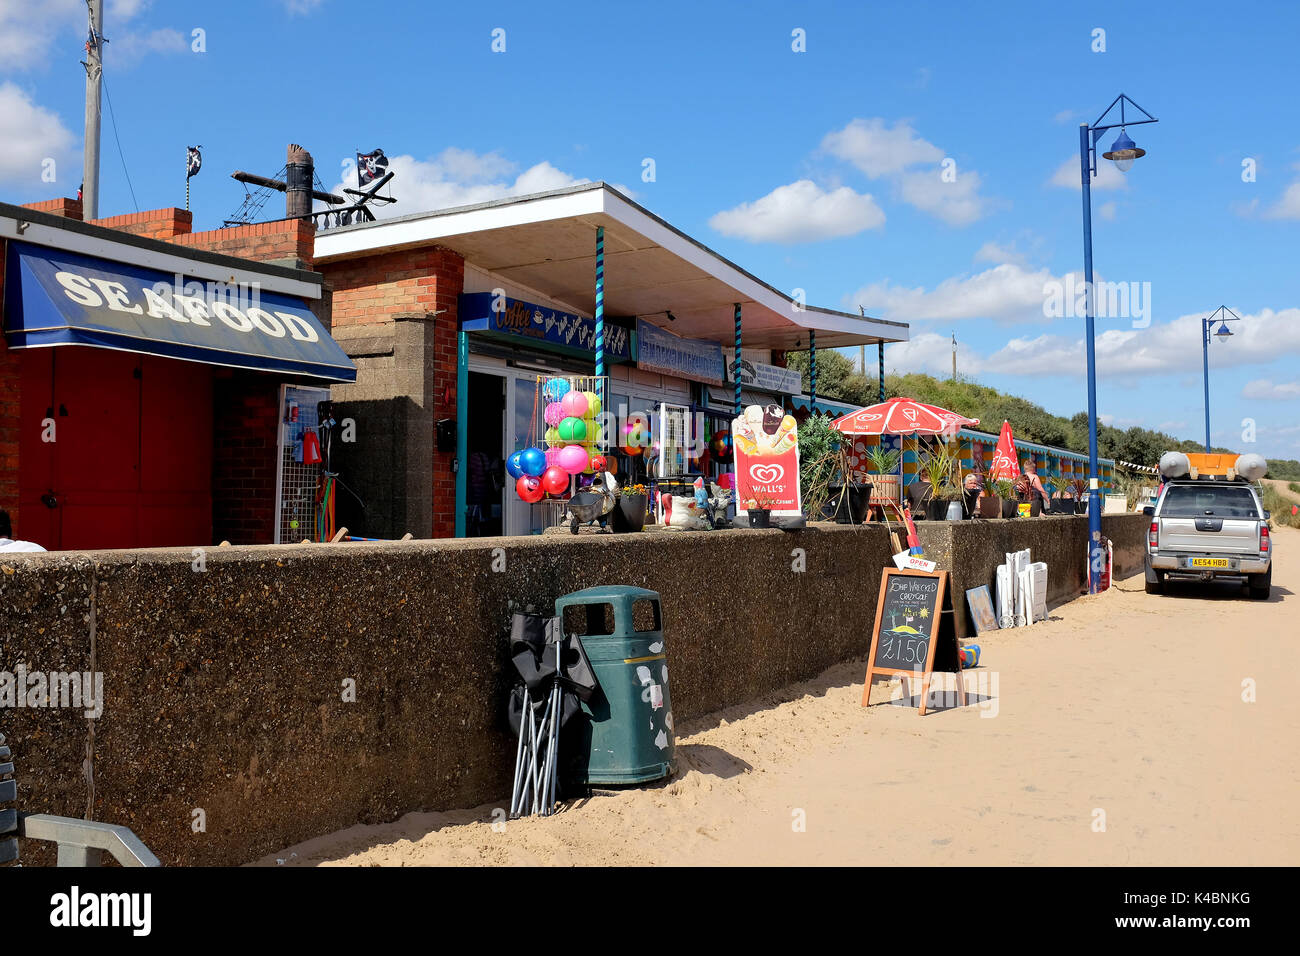 Mablethorpe, Lincolnshire, UK. August 15, 2017. The shops and cafe on the promenade of the North beach at Mablethorpe in Lincolnshire. Stock Photo